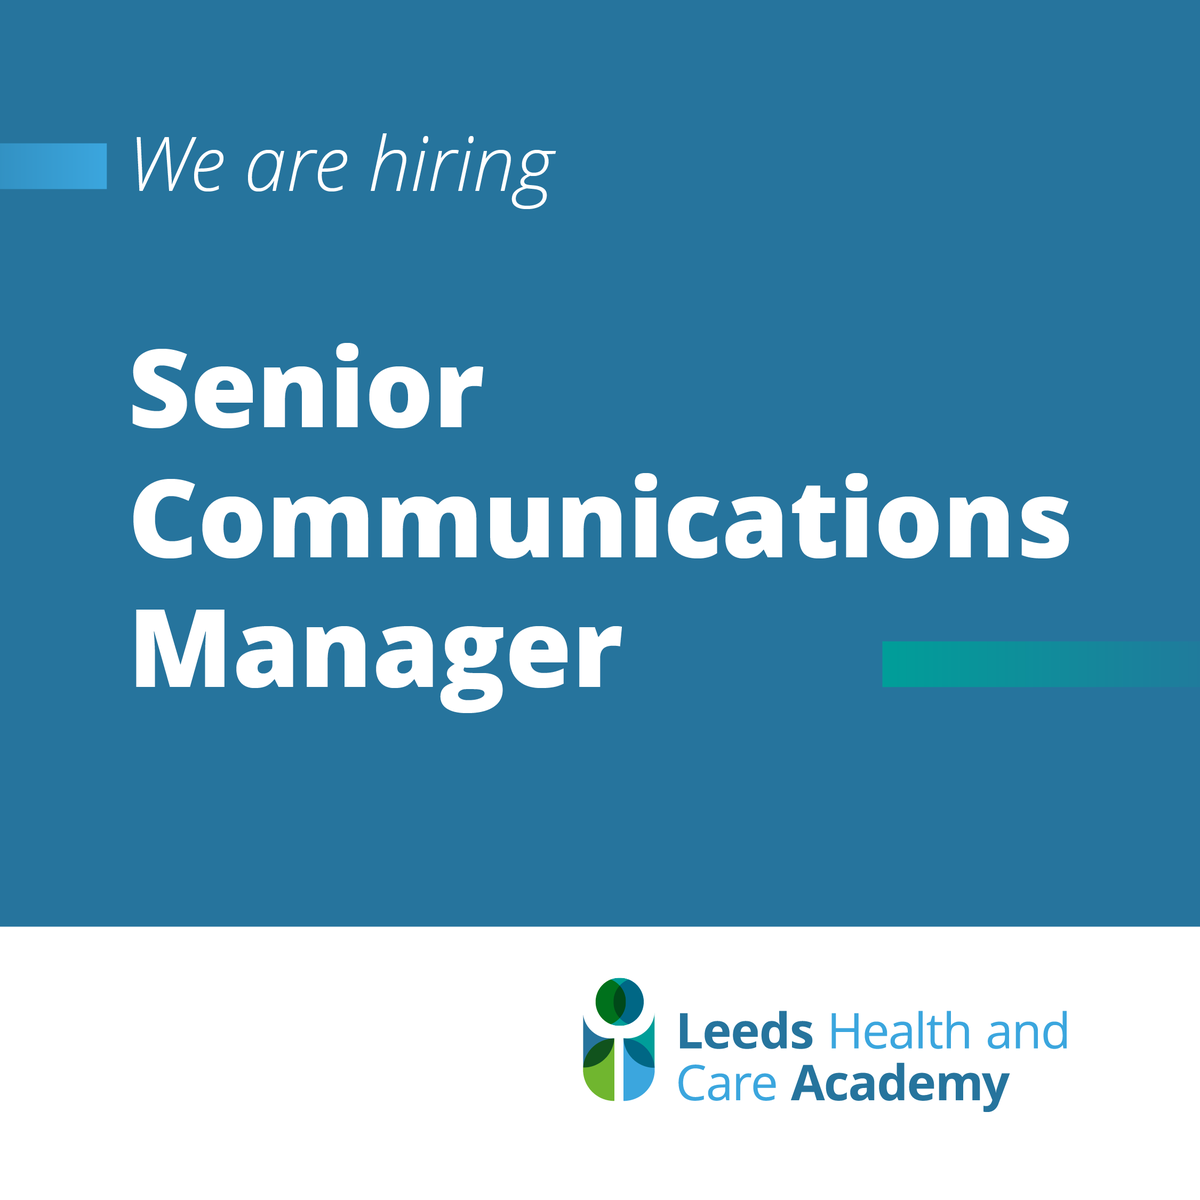 We’re have an exciting opportunity for a Senior Communications Manager to join the team, to create & deliver impactful communications strategies, & implement activity that aims to raise awareness of the Academy locally, regionally & nationally. Read more: leedshealthandcareacademy.org/news/job-vacan…